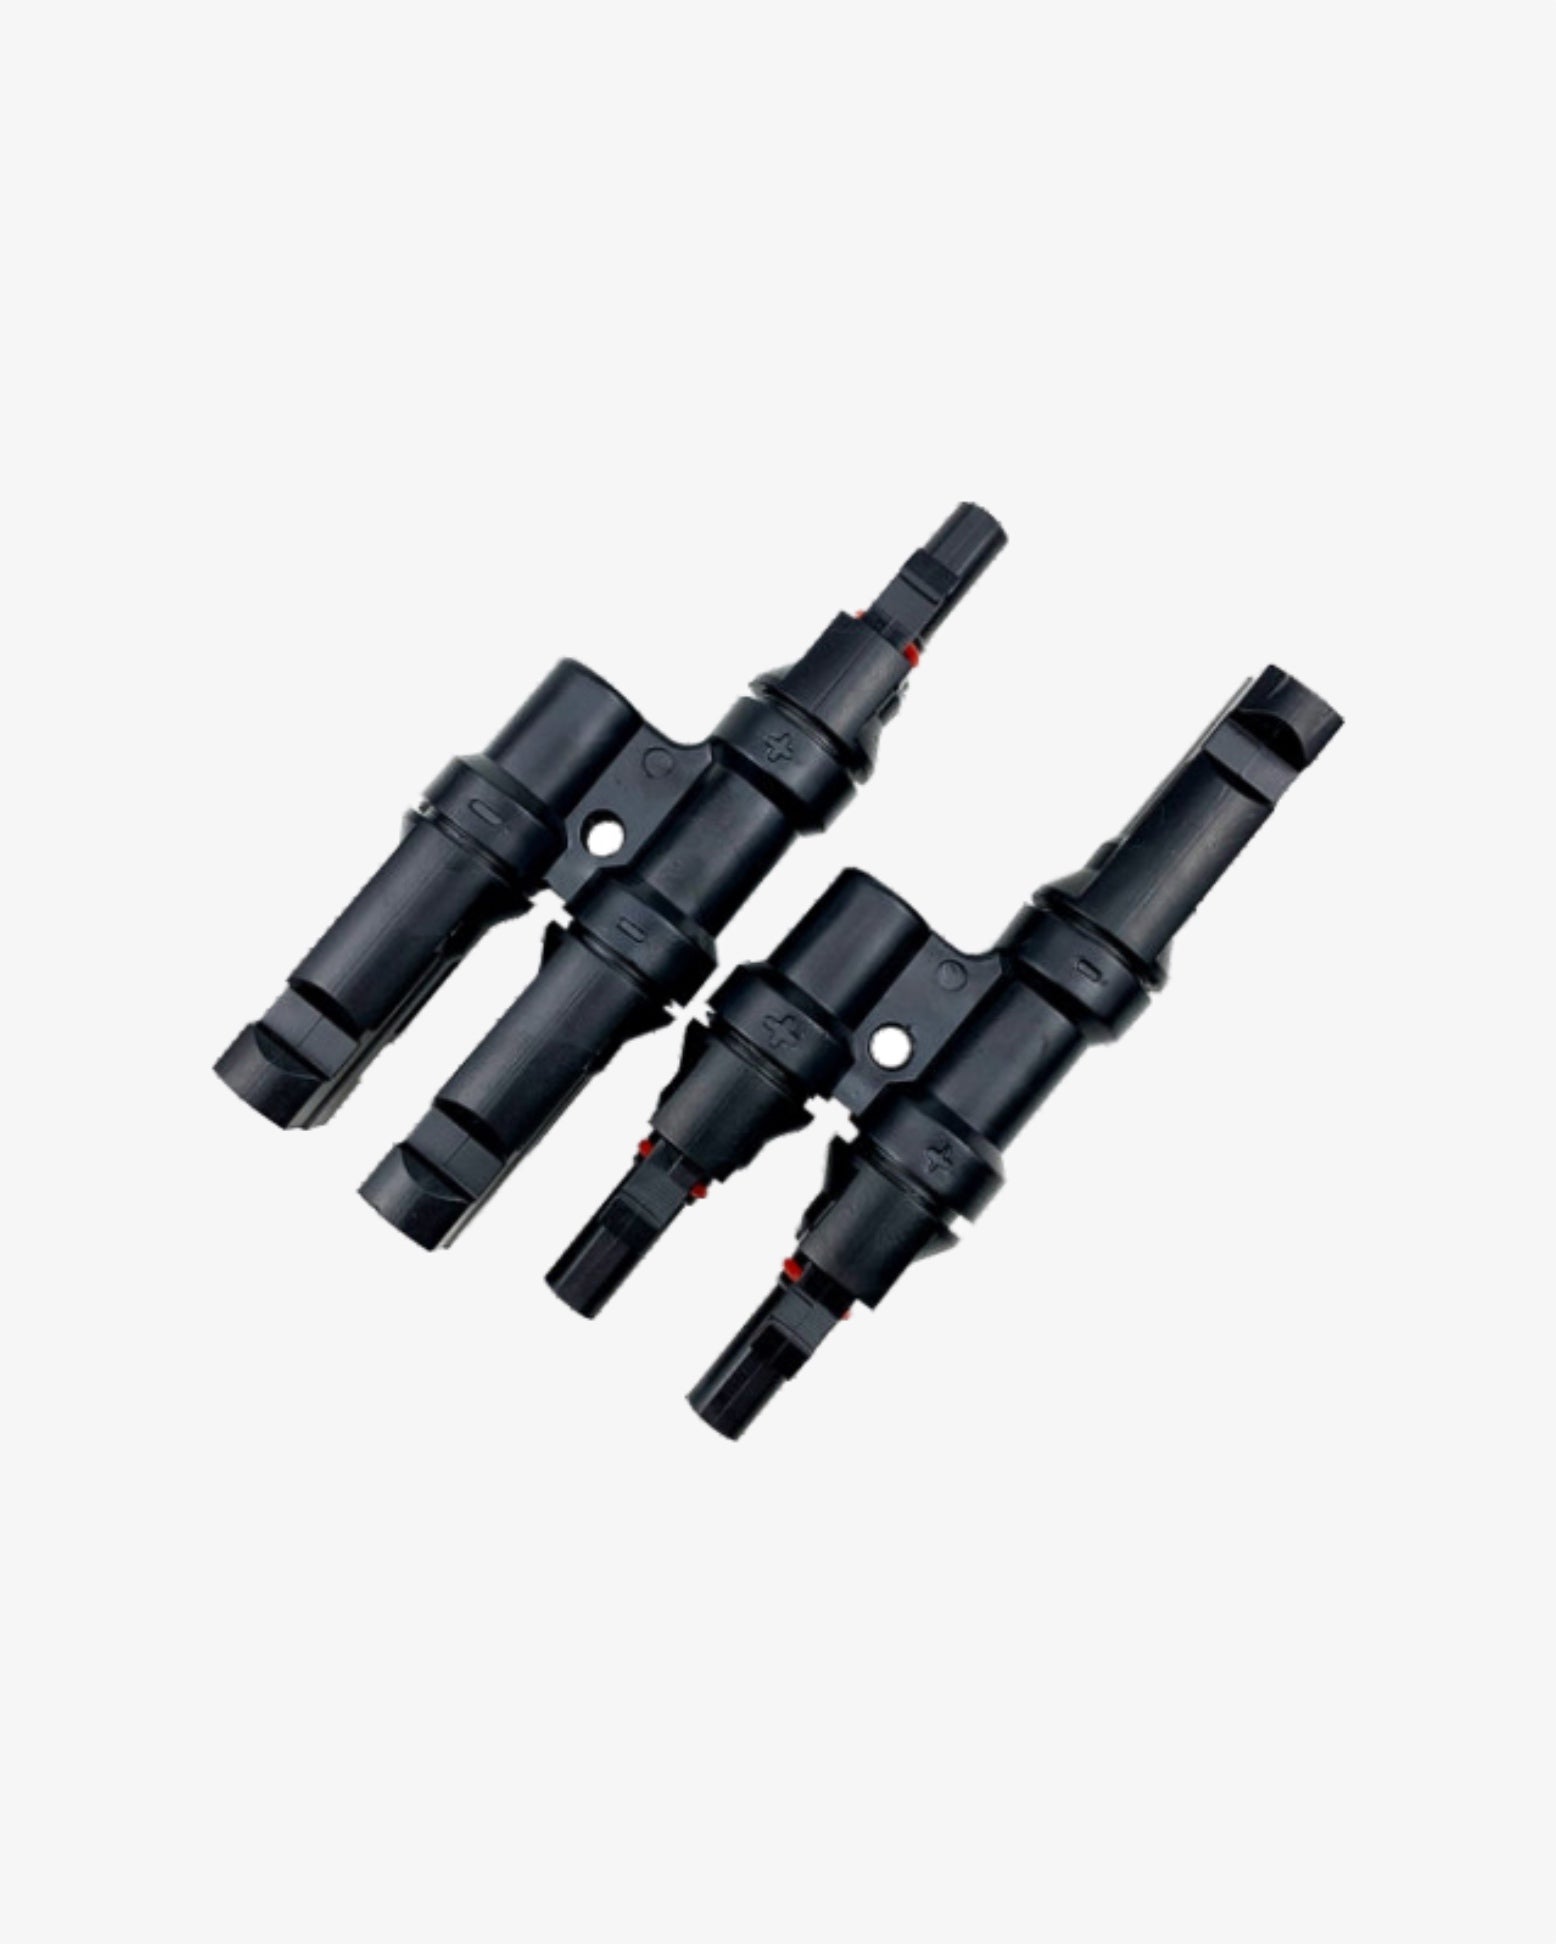 Professional Parallel Connector Universal MMF/FFM Solar Branch Adapter  Solars Simple Operation Panel Cables Distributor Cable Plug In-line Socket